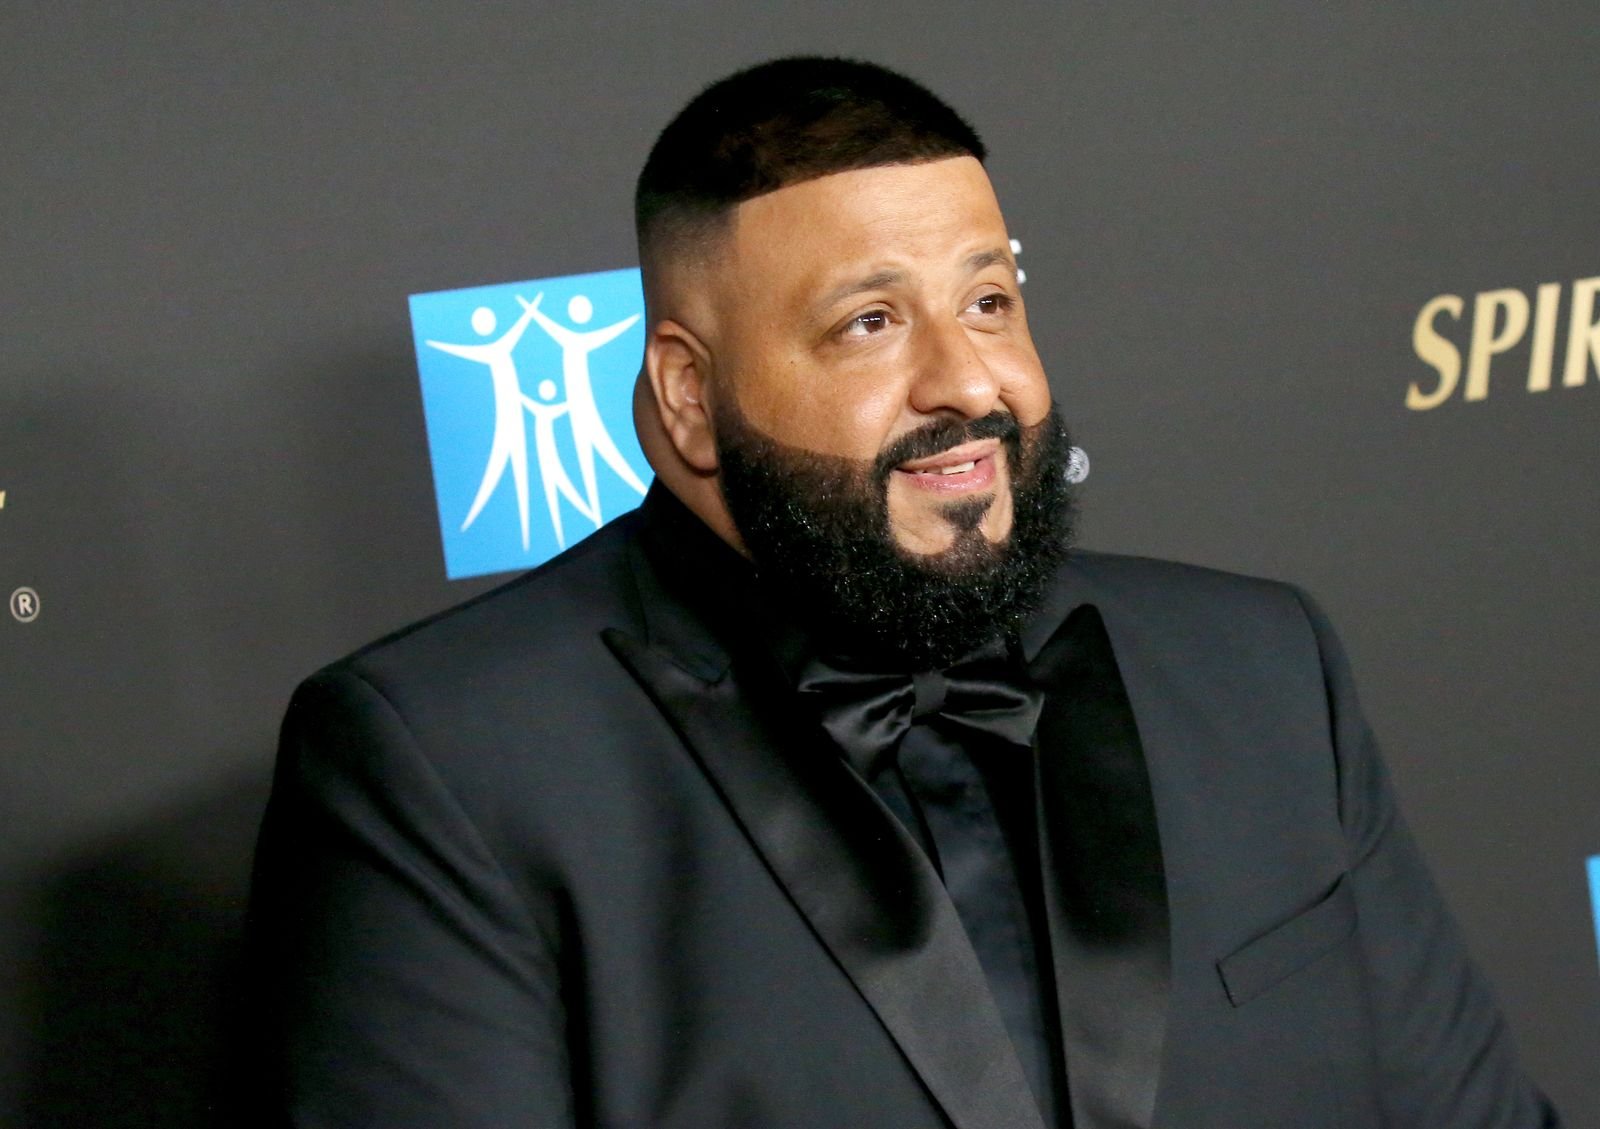 DJ Khaled at the City of Hope's Spirit of Life 2019 Gala held at The Barker Hanger on October 10, 2019 | Photo: Getty Images